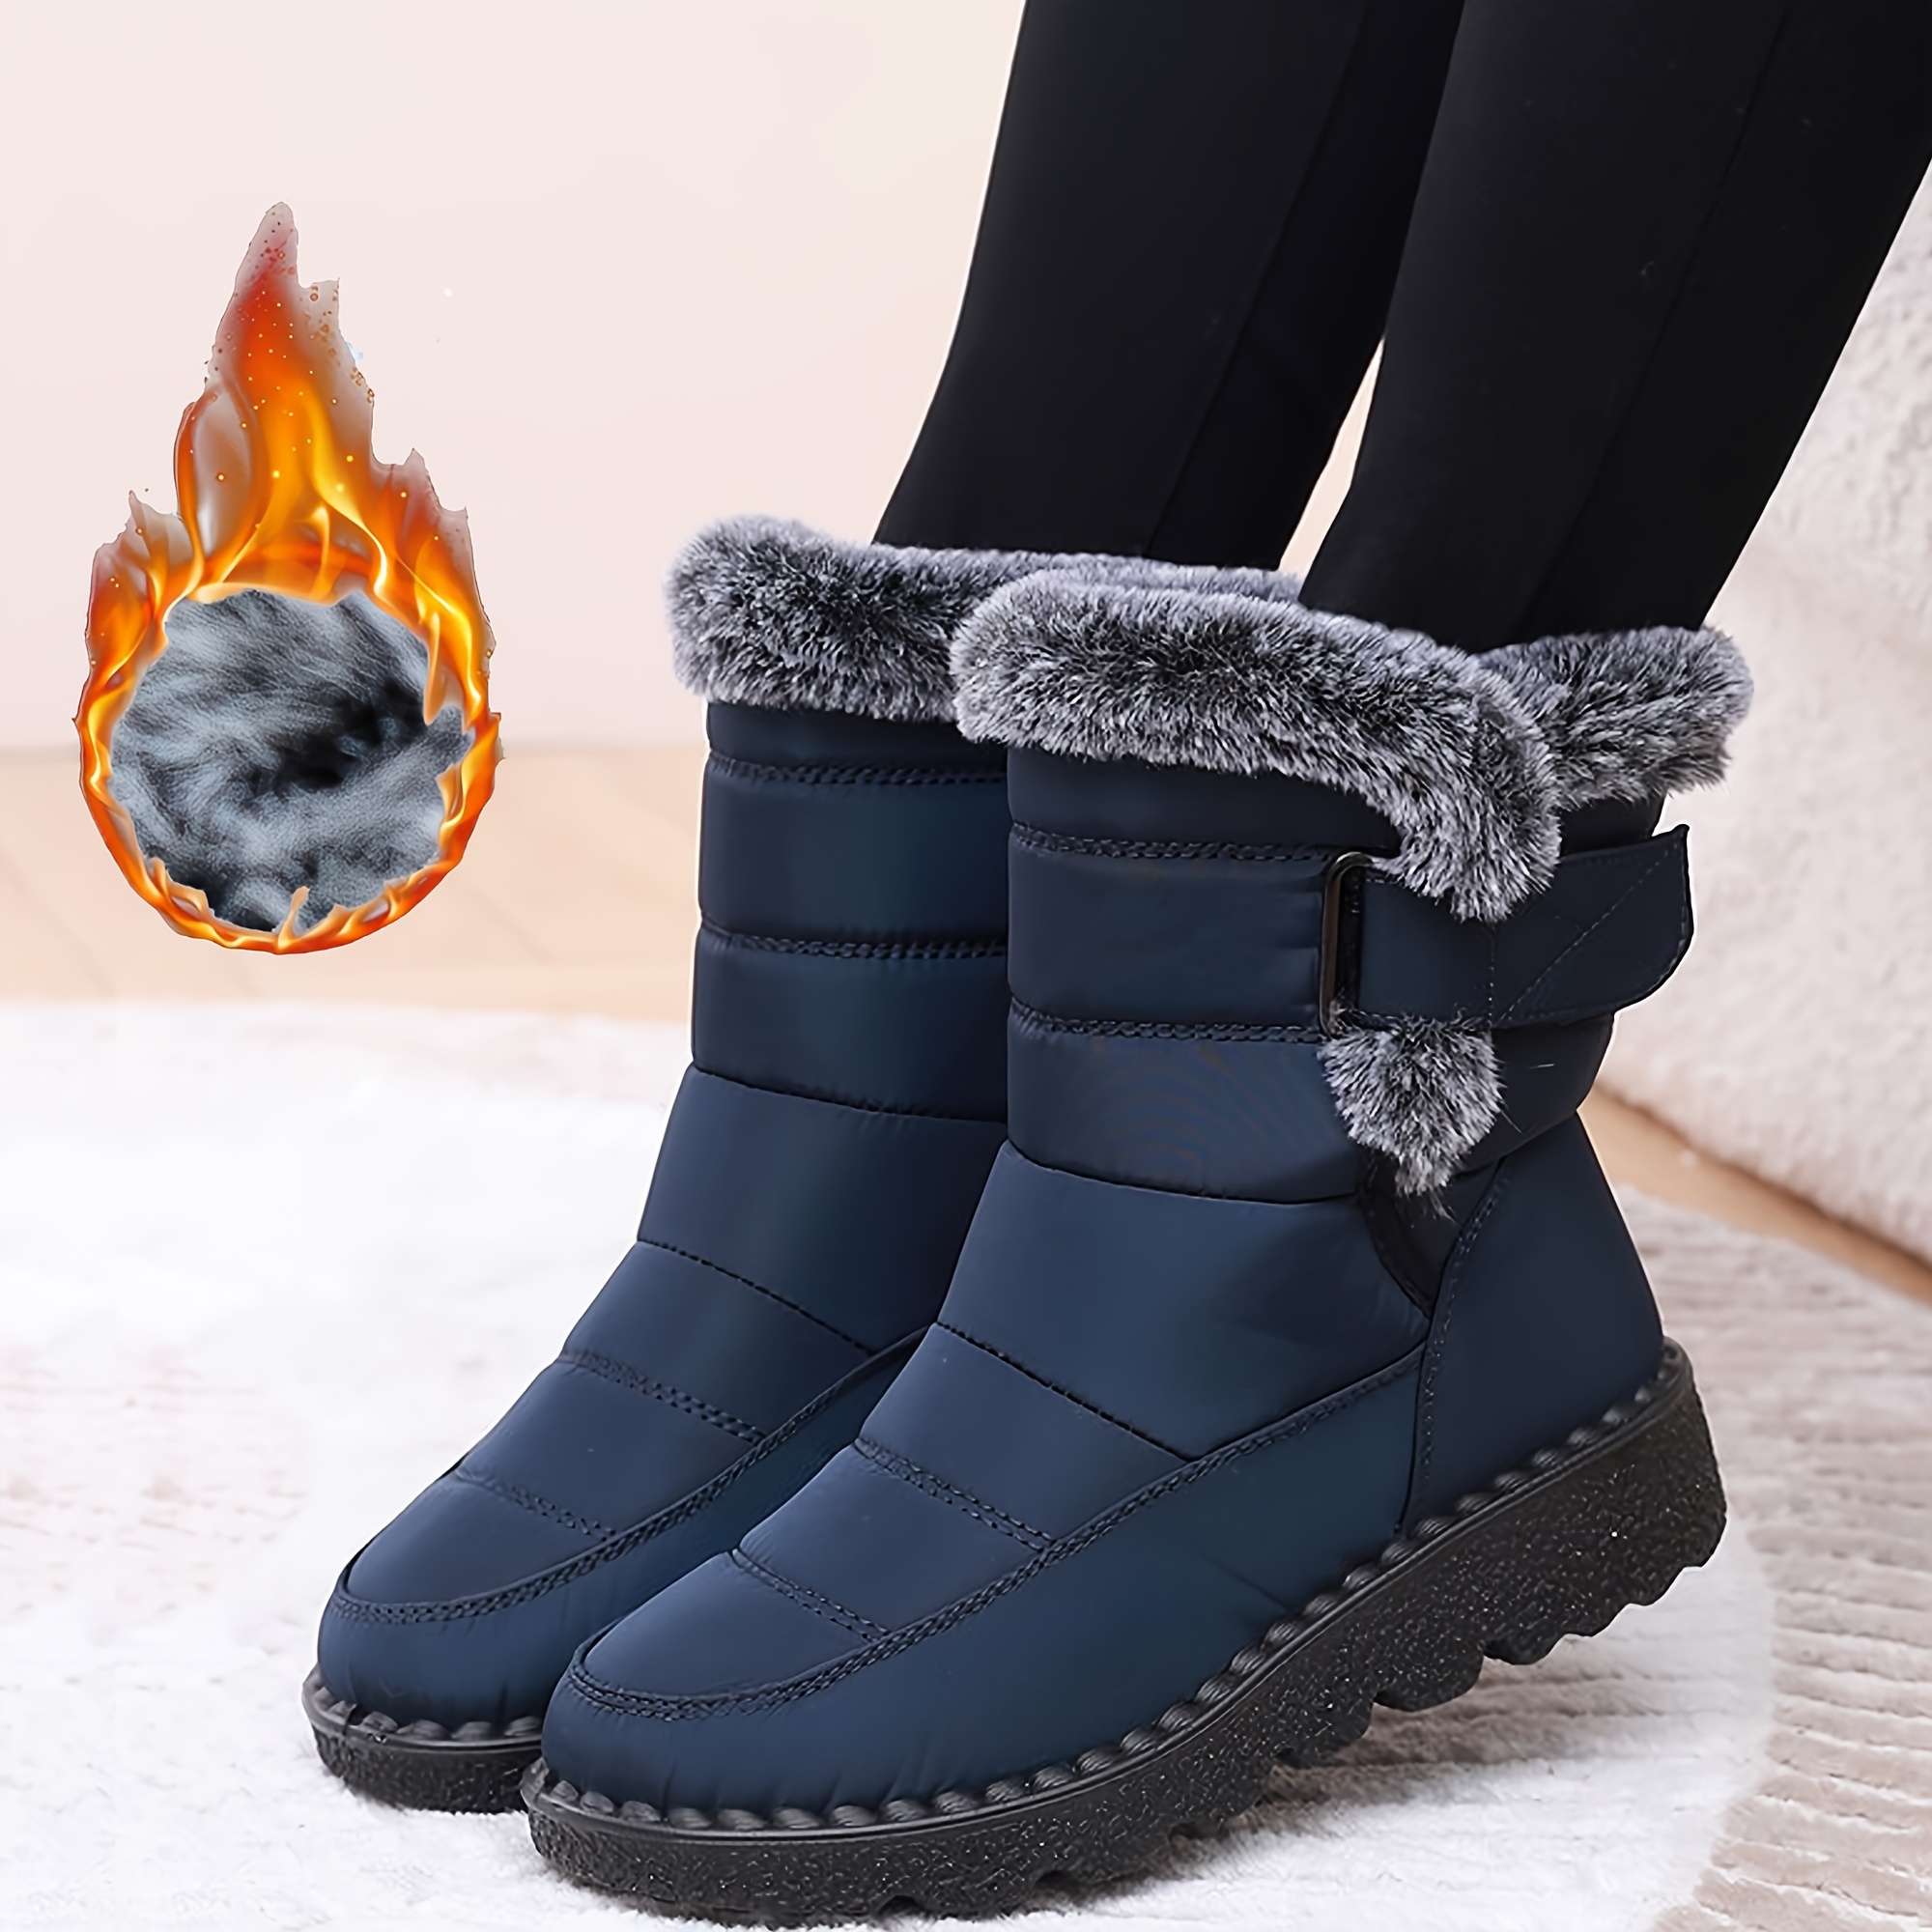 

Women's Faux Fur Liner Snow Boots, Round Toe Thermal Winter Mid Calf Boots, Hook & Loop Fastener Adjustable Outer Sneakers